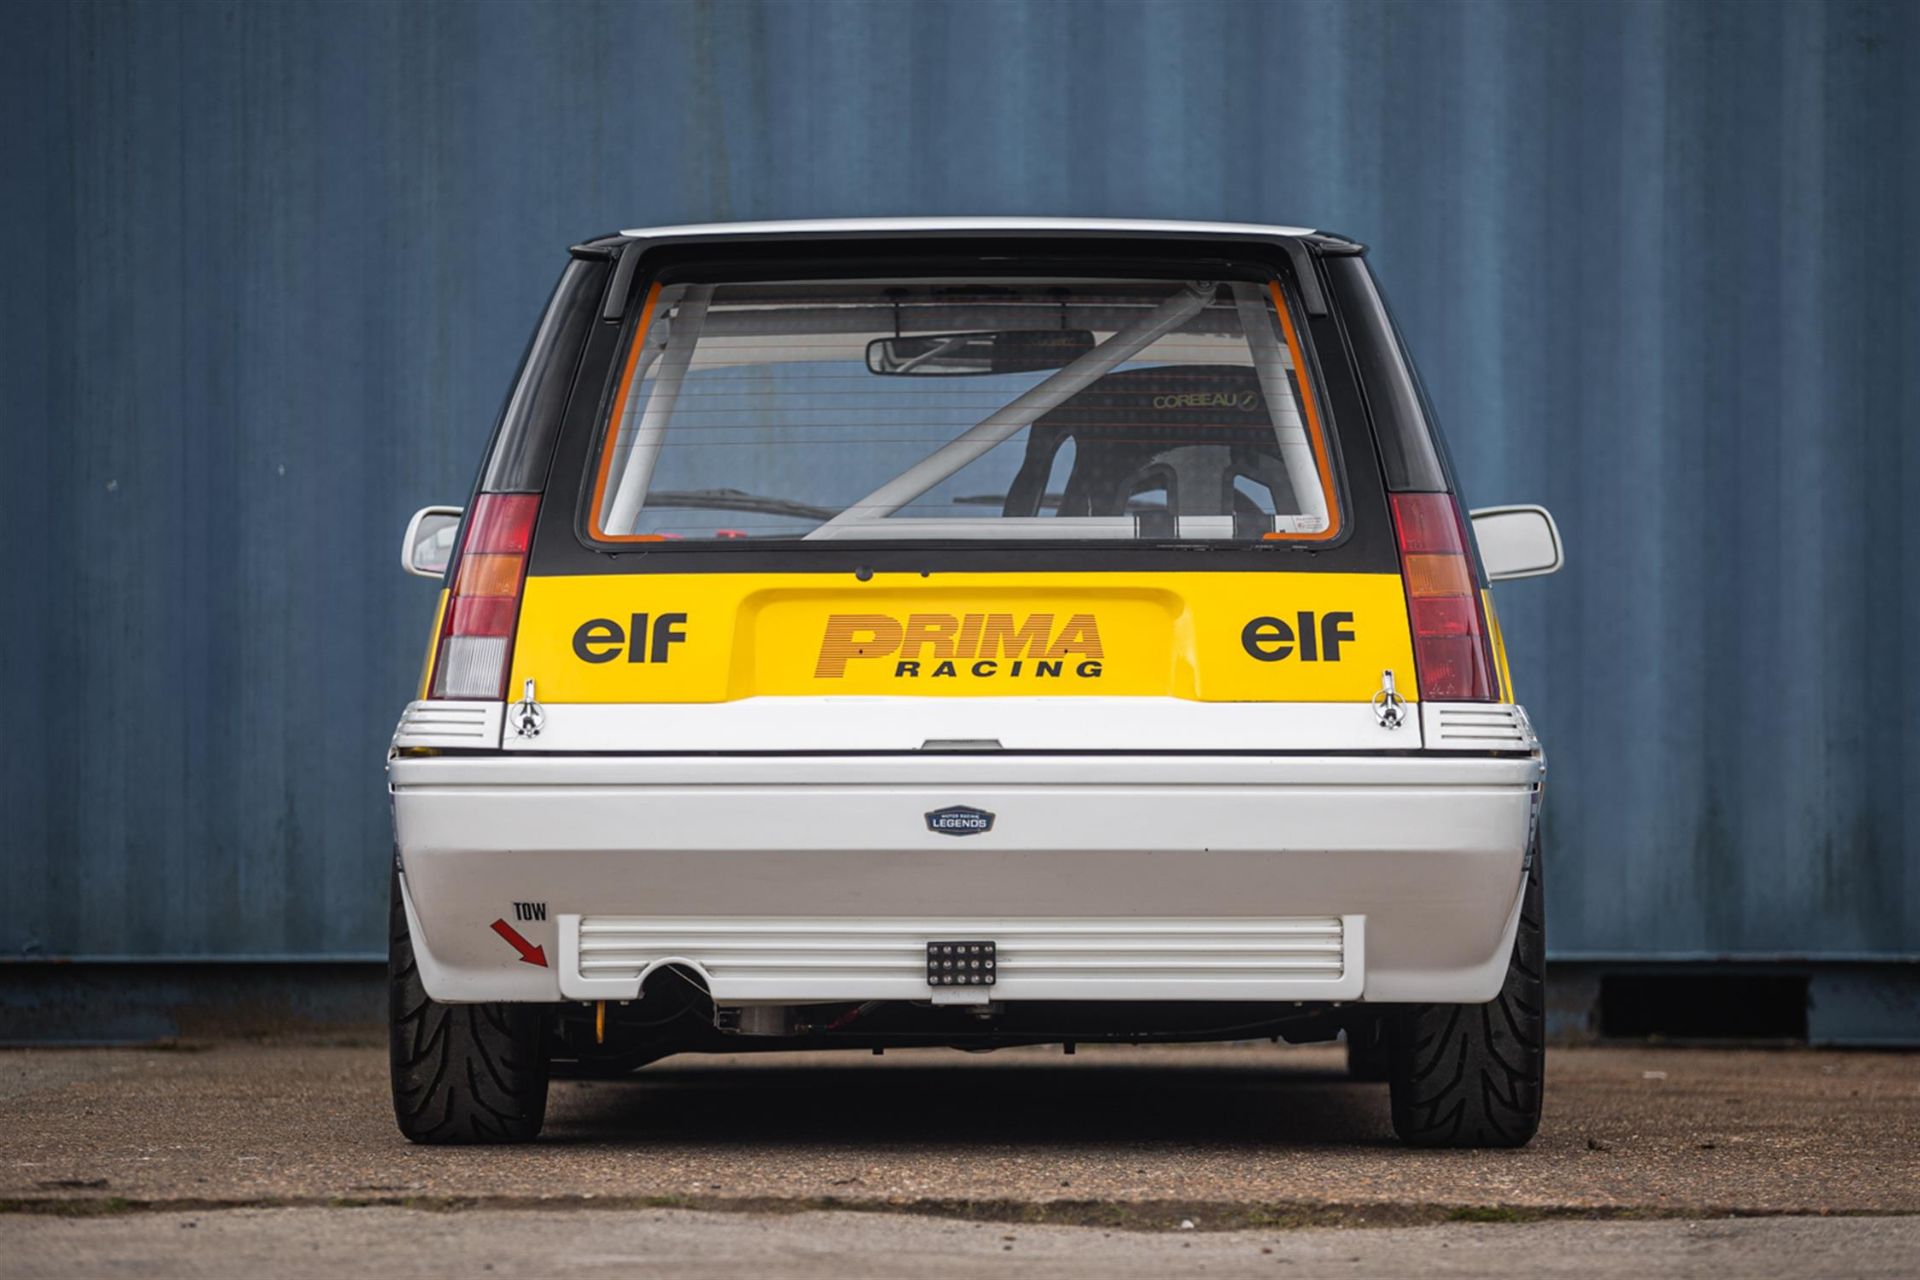 1986 Renault 5 GT Turbo Coupé Historic Touring Car - Image 7 of 10